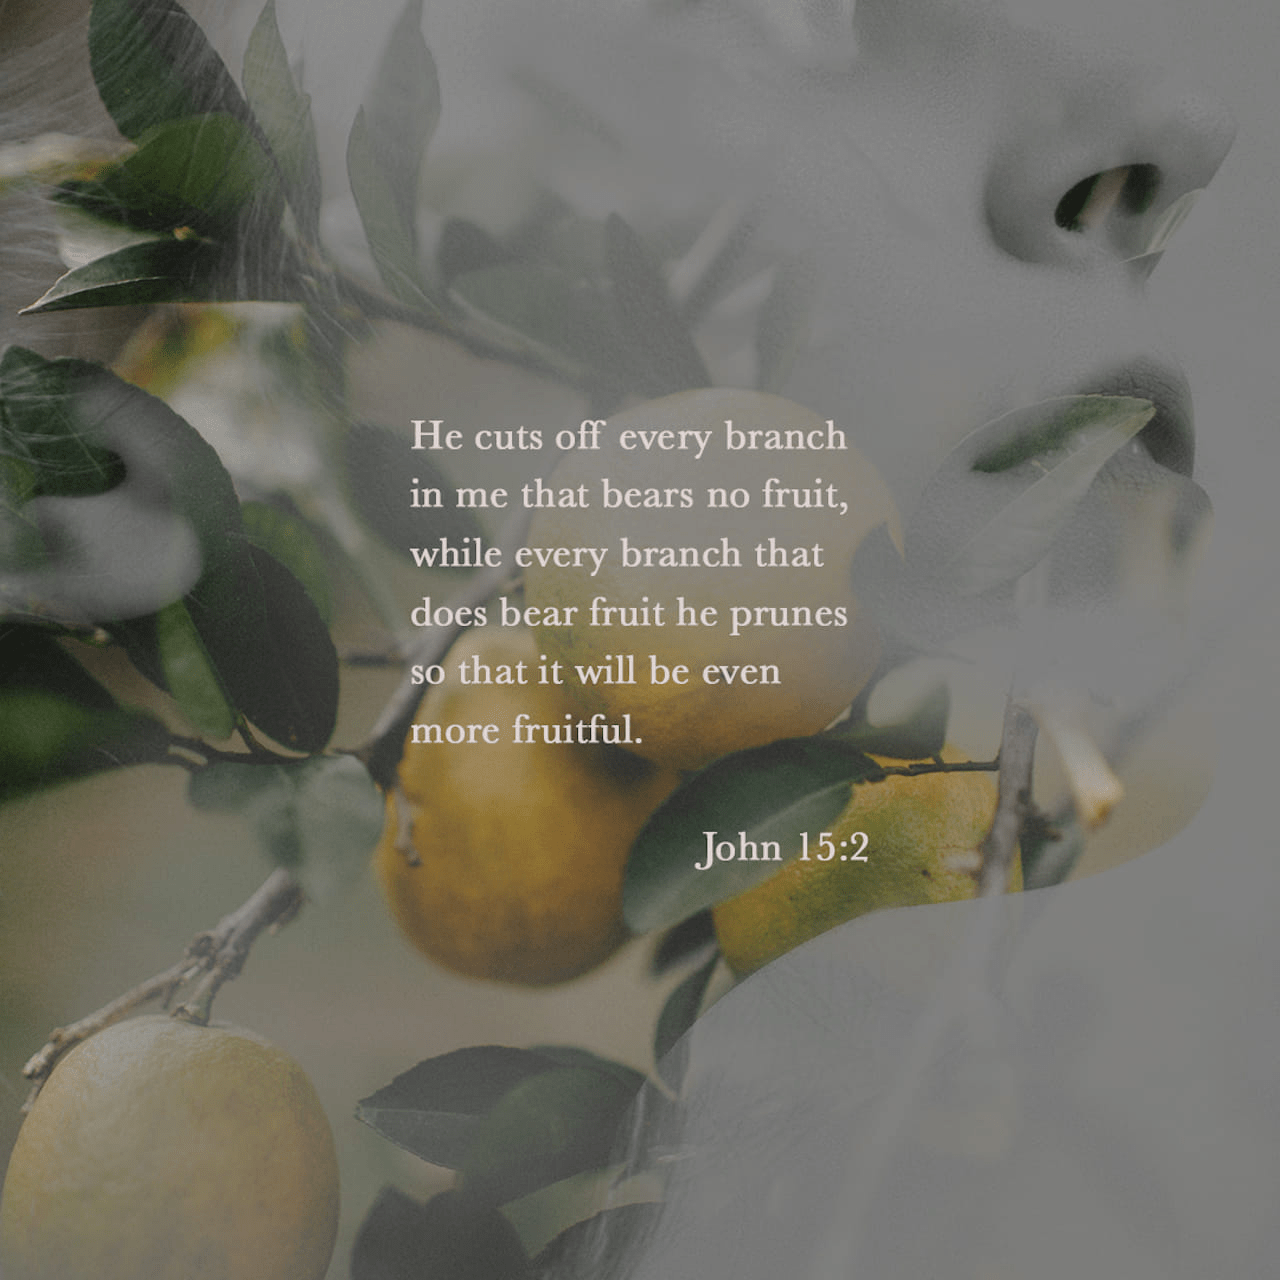 VOTD March 25 - “Every branch in Me that does not bear fruit, He takes away; and every branch that bears fruit, He prunes it so that it may bear more fruit.” ‭‭John‬ ‭15:2‬ ‭NASB‬‬